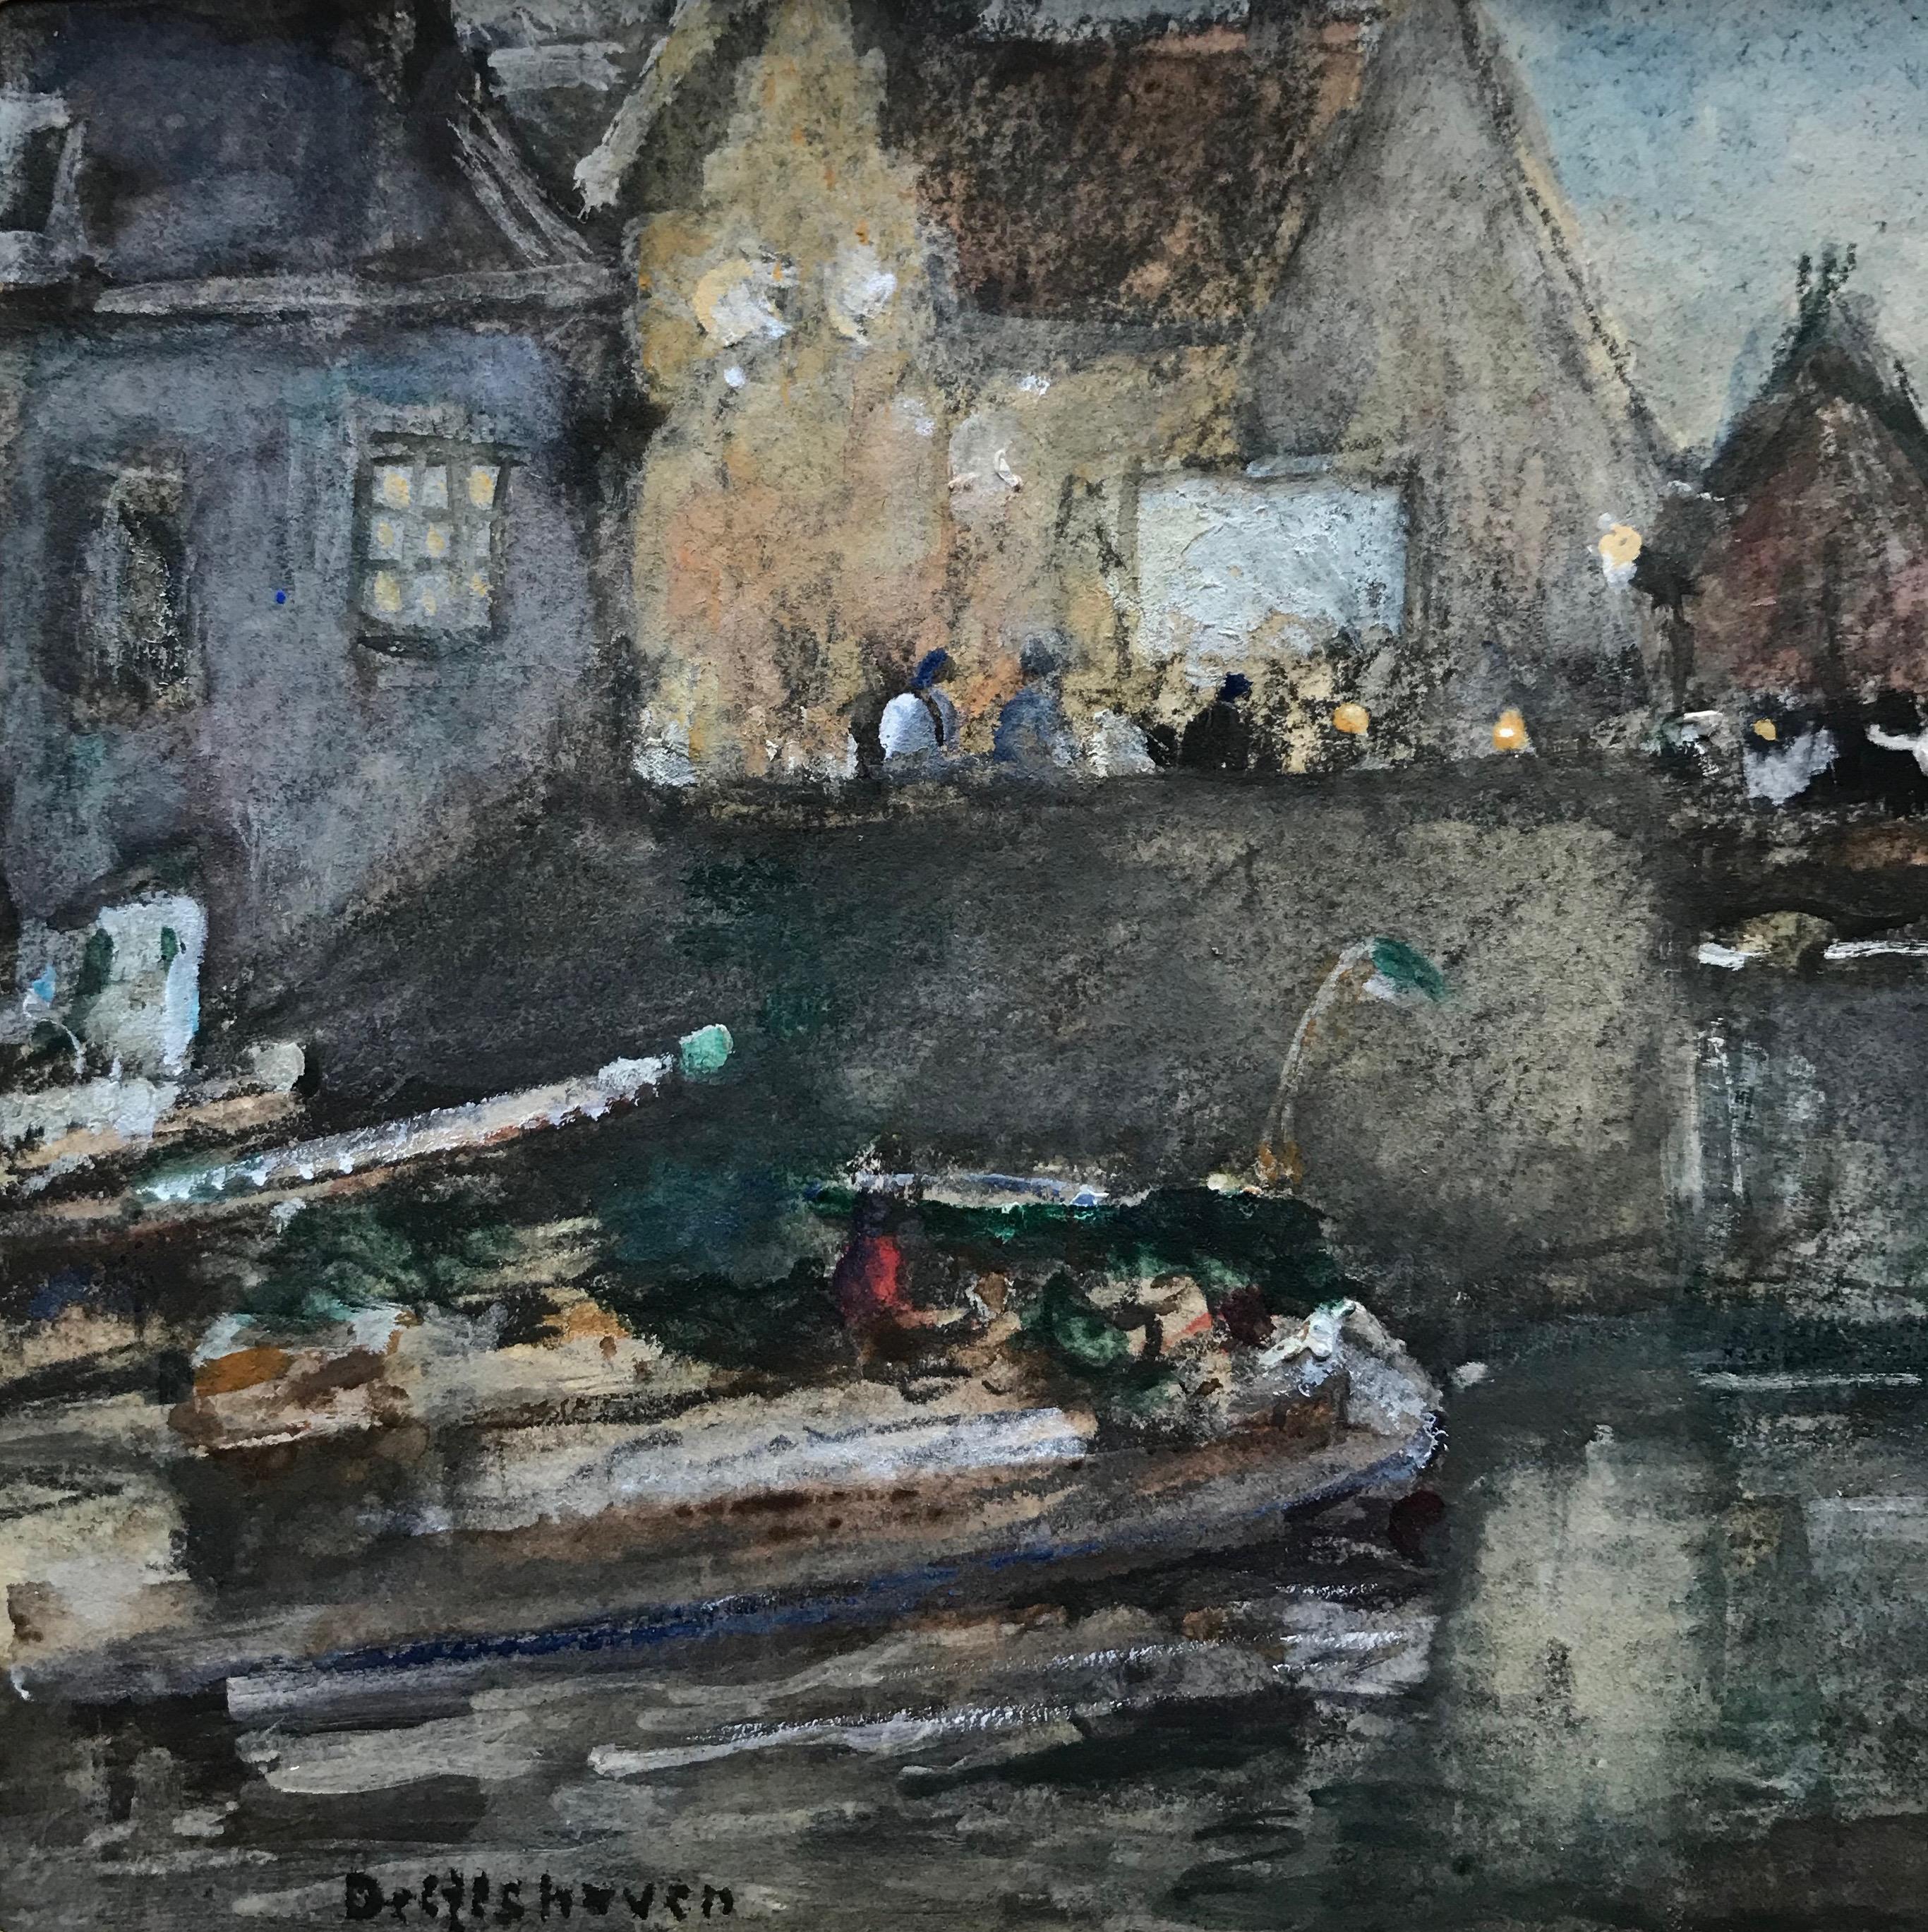 Hans Herrmann (1858-1942)
Delftshaven harbour scene
Signed and inscribed with title
Watercolour with traces of pencil and touches of gouache
4.5 x 6inches

A spirited and atmospheric view of the Dutch harbour at Delfshaven, a district of